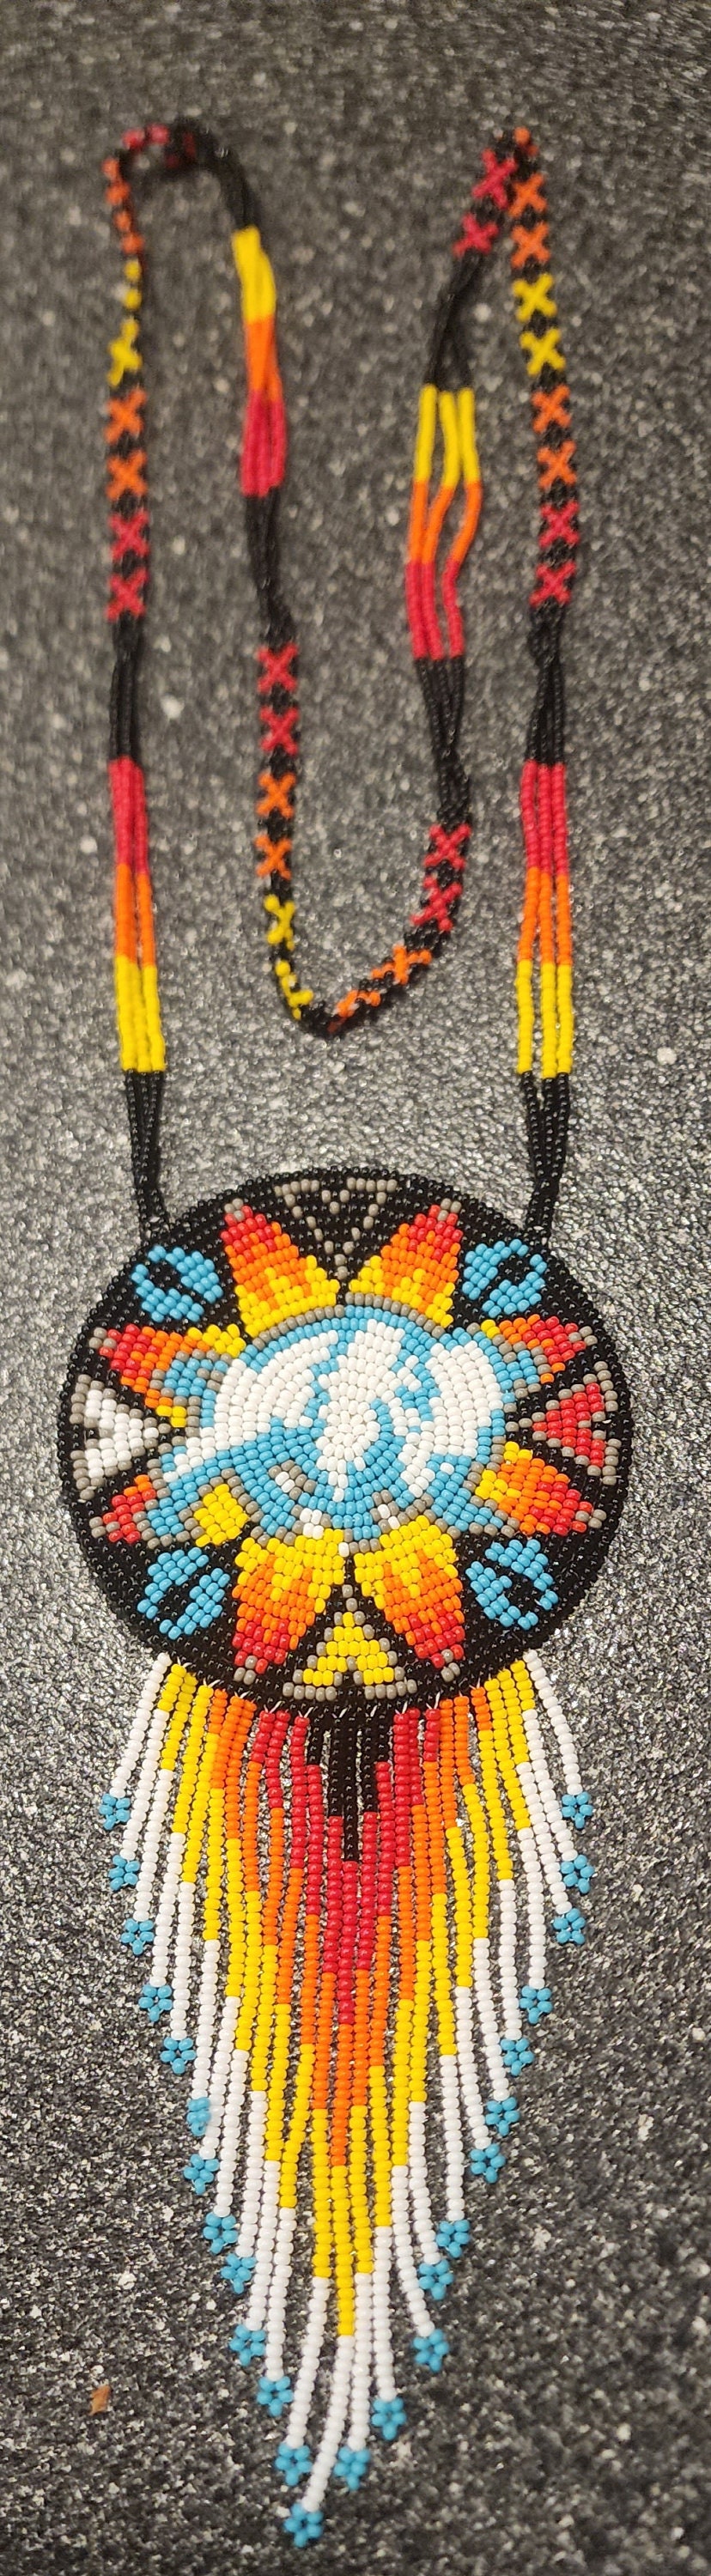 Beaded Medallion Necklace With a White Buffalo Design - Etsy